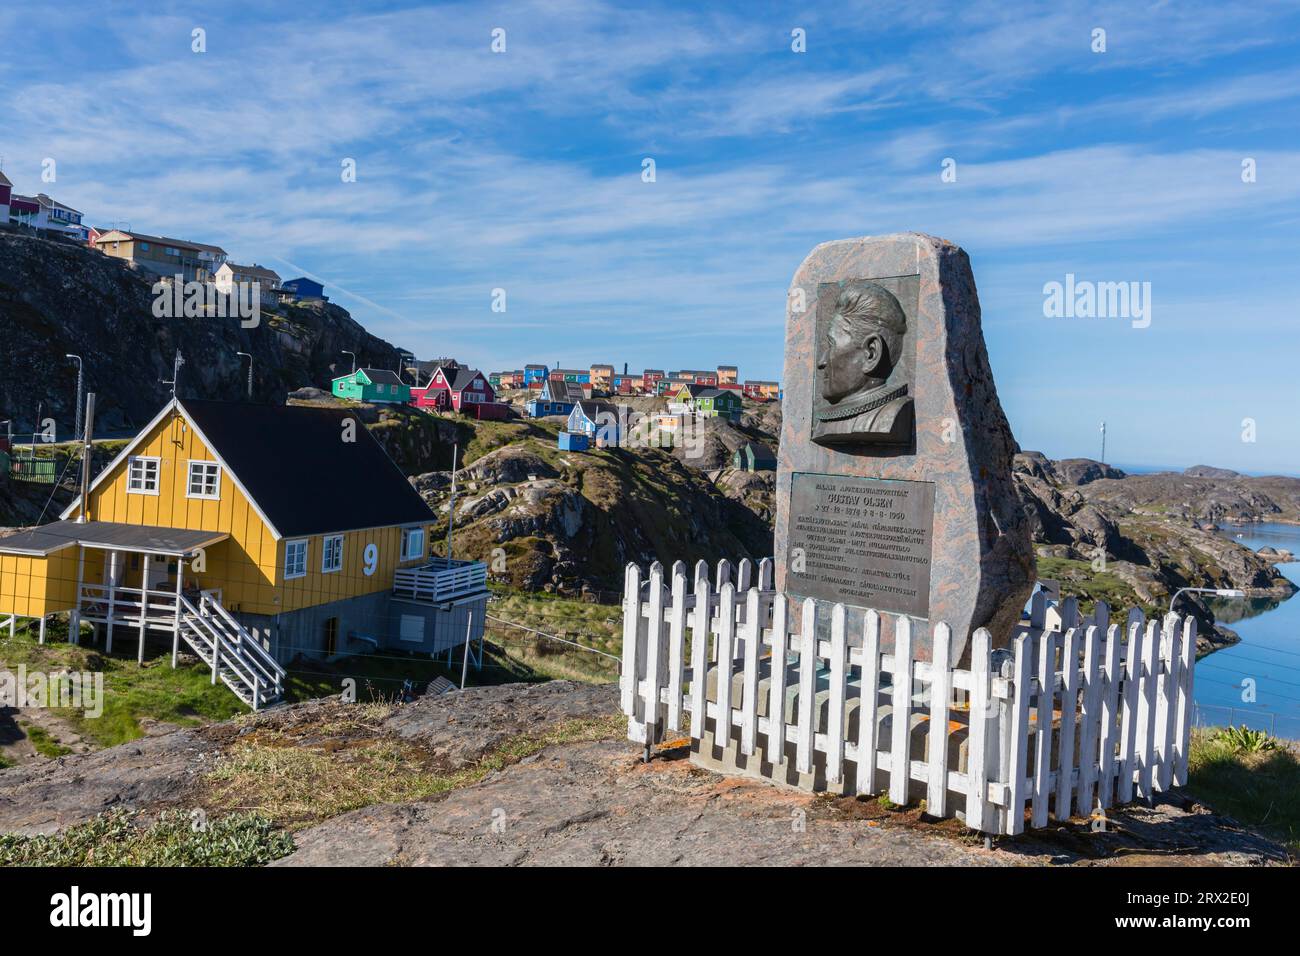 The colorful Danish town of Sisimiut, Western Greenland, Polar Regions Stock Photo